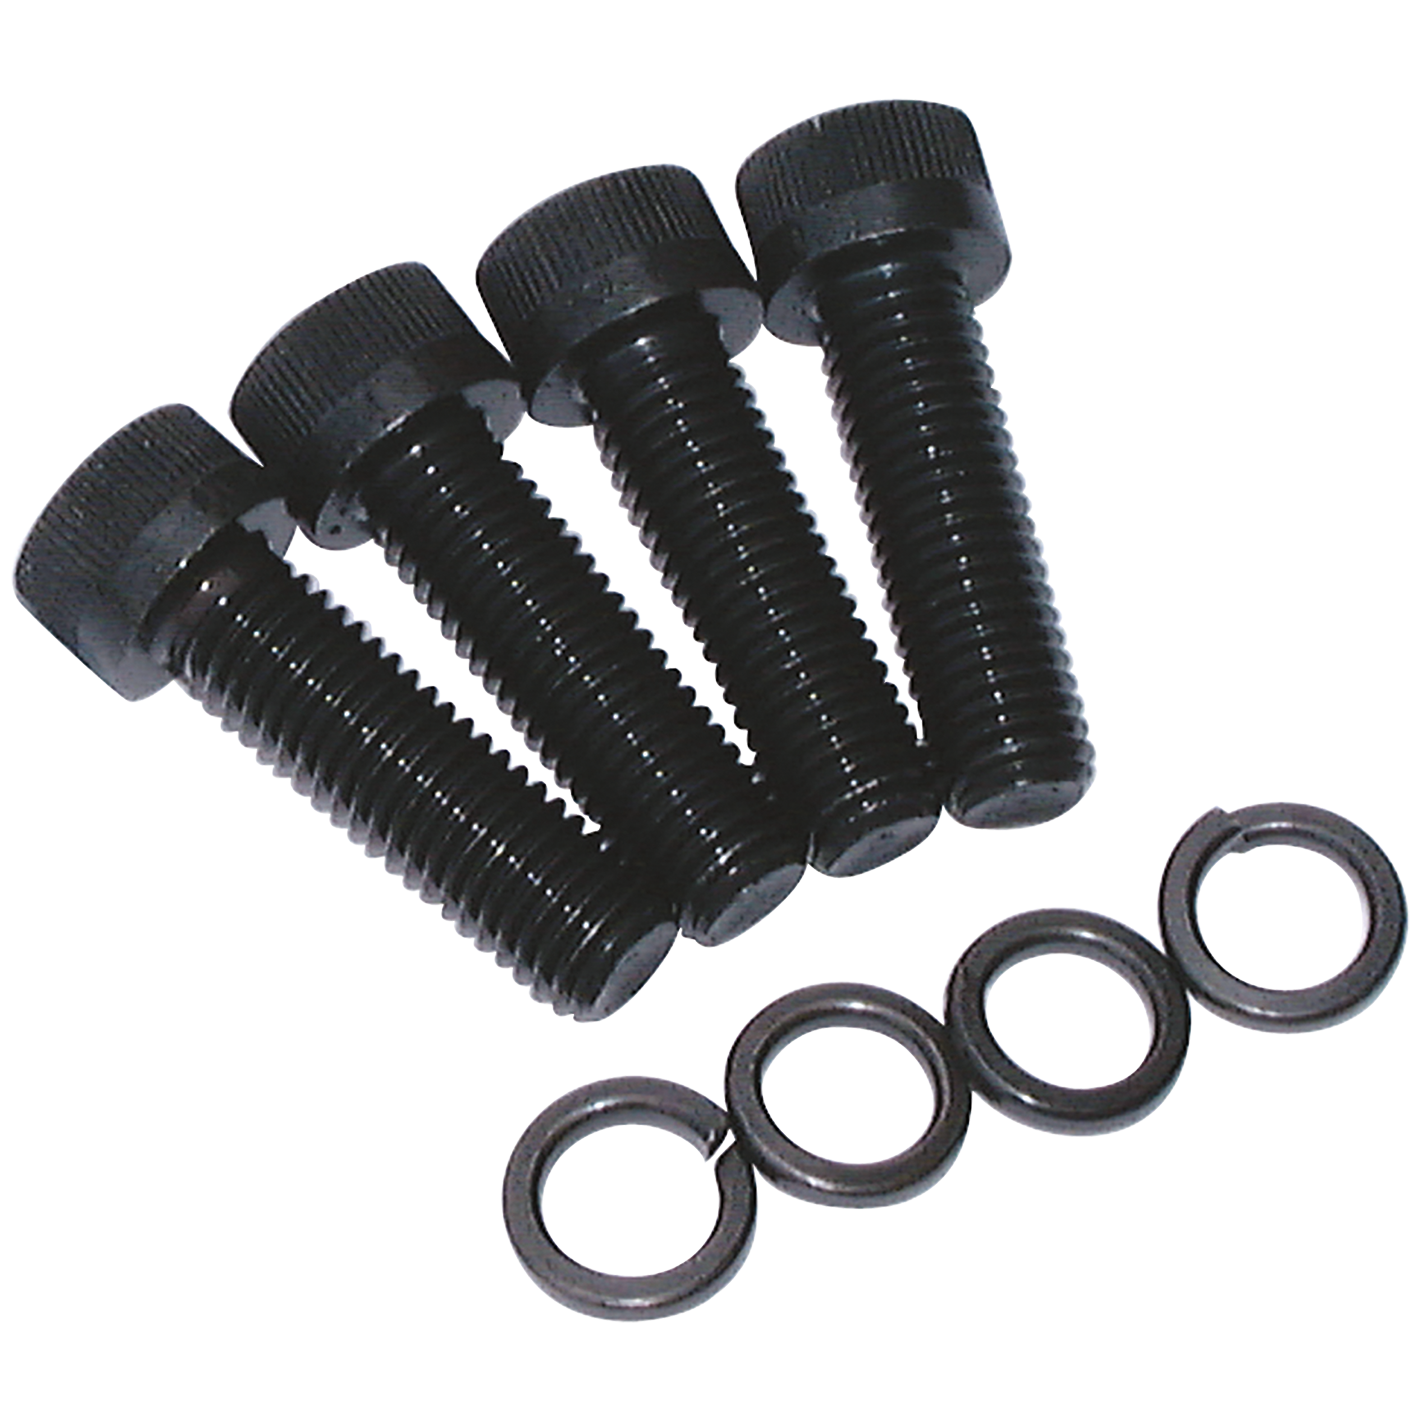 M10X45 BOLTS AND SPRING WASHERS X 4